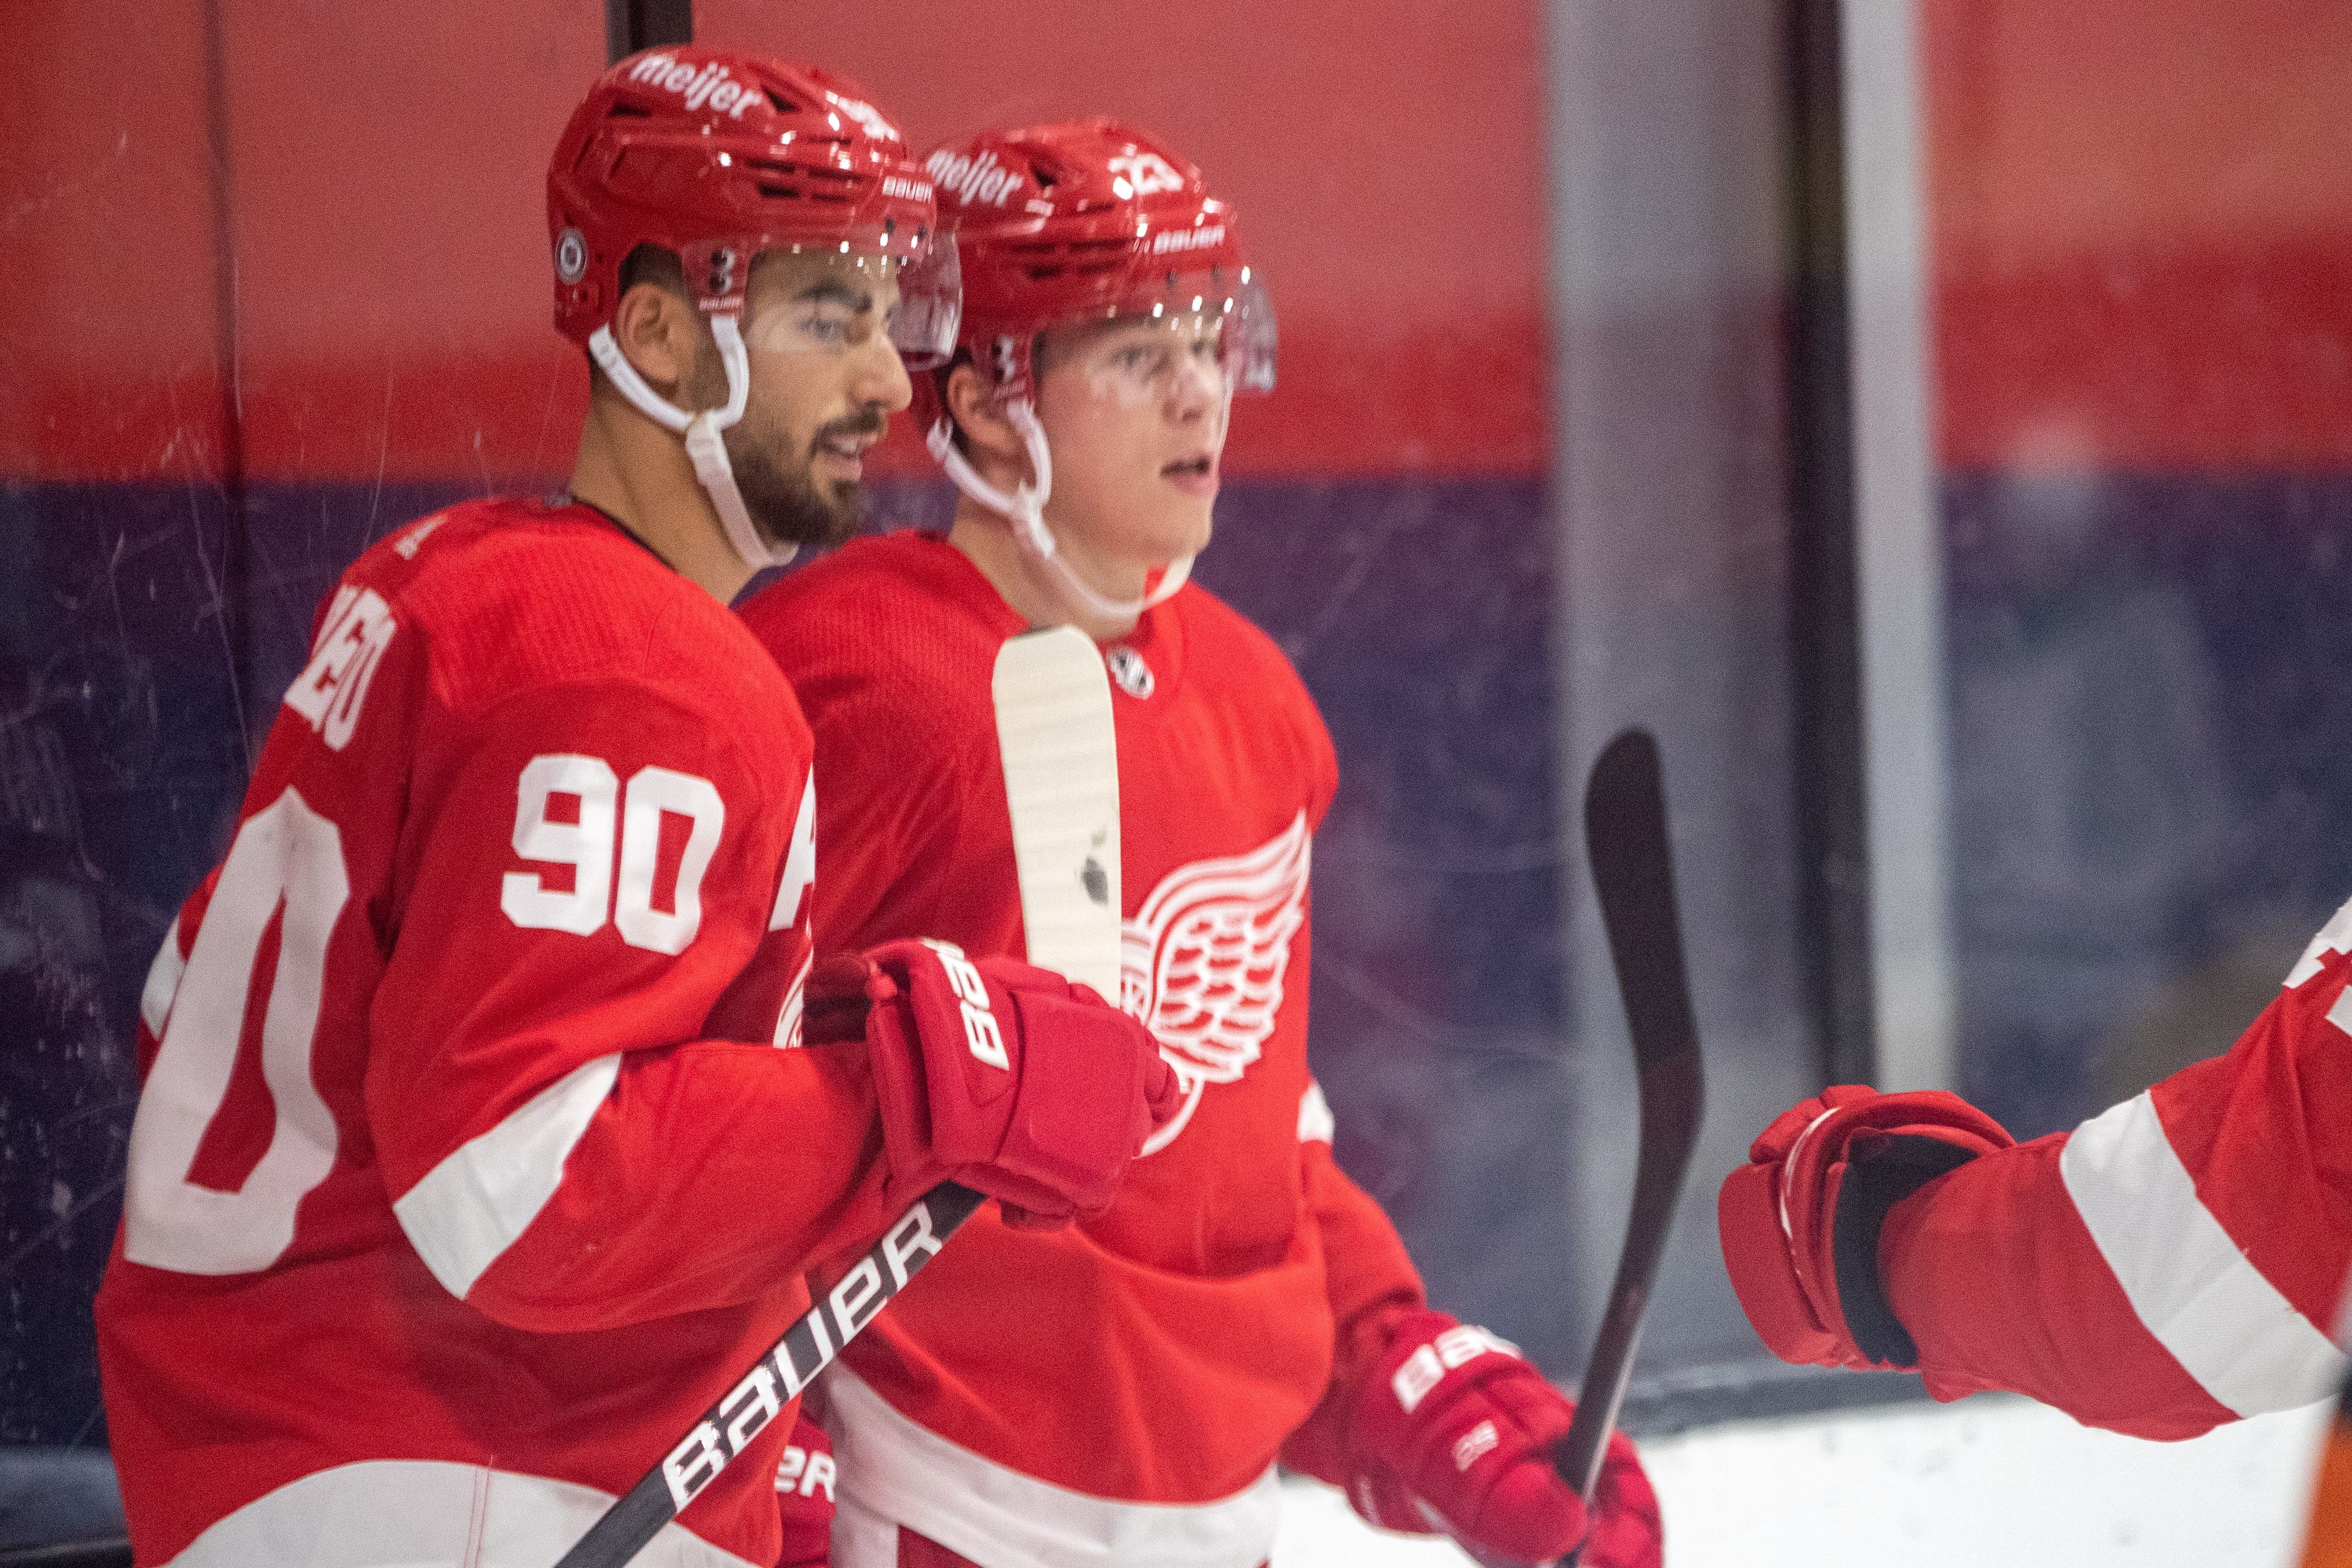 Larkin, group of NHL stars with Michigan roots training together